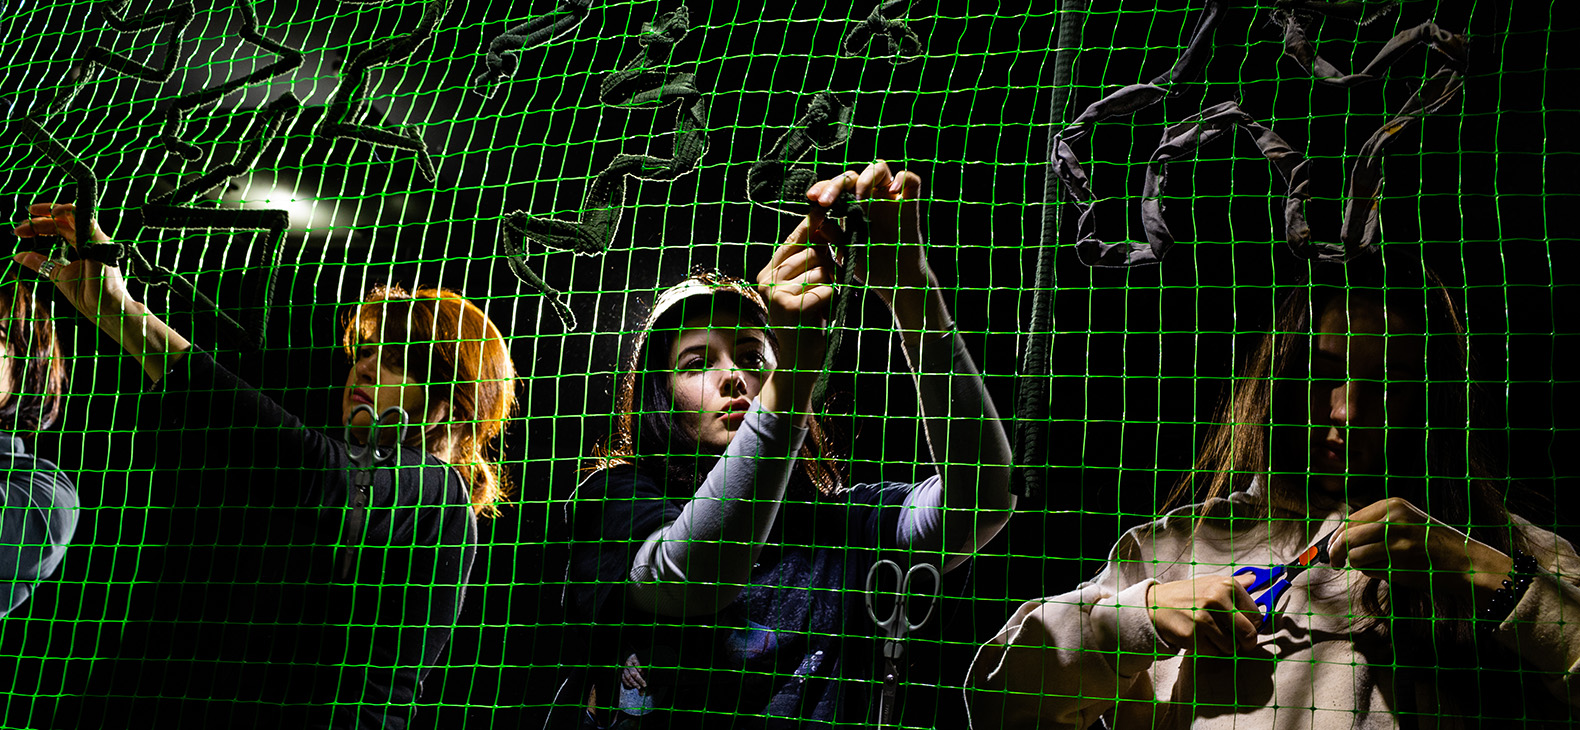 The Thin Line - Exhibition of Ukrainian photographs; Image: Volunteers knotting camouflage nets, young women in the spotlight behind a green net; Photographer: Kateryna Moskalyuk 